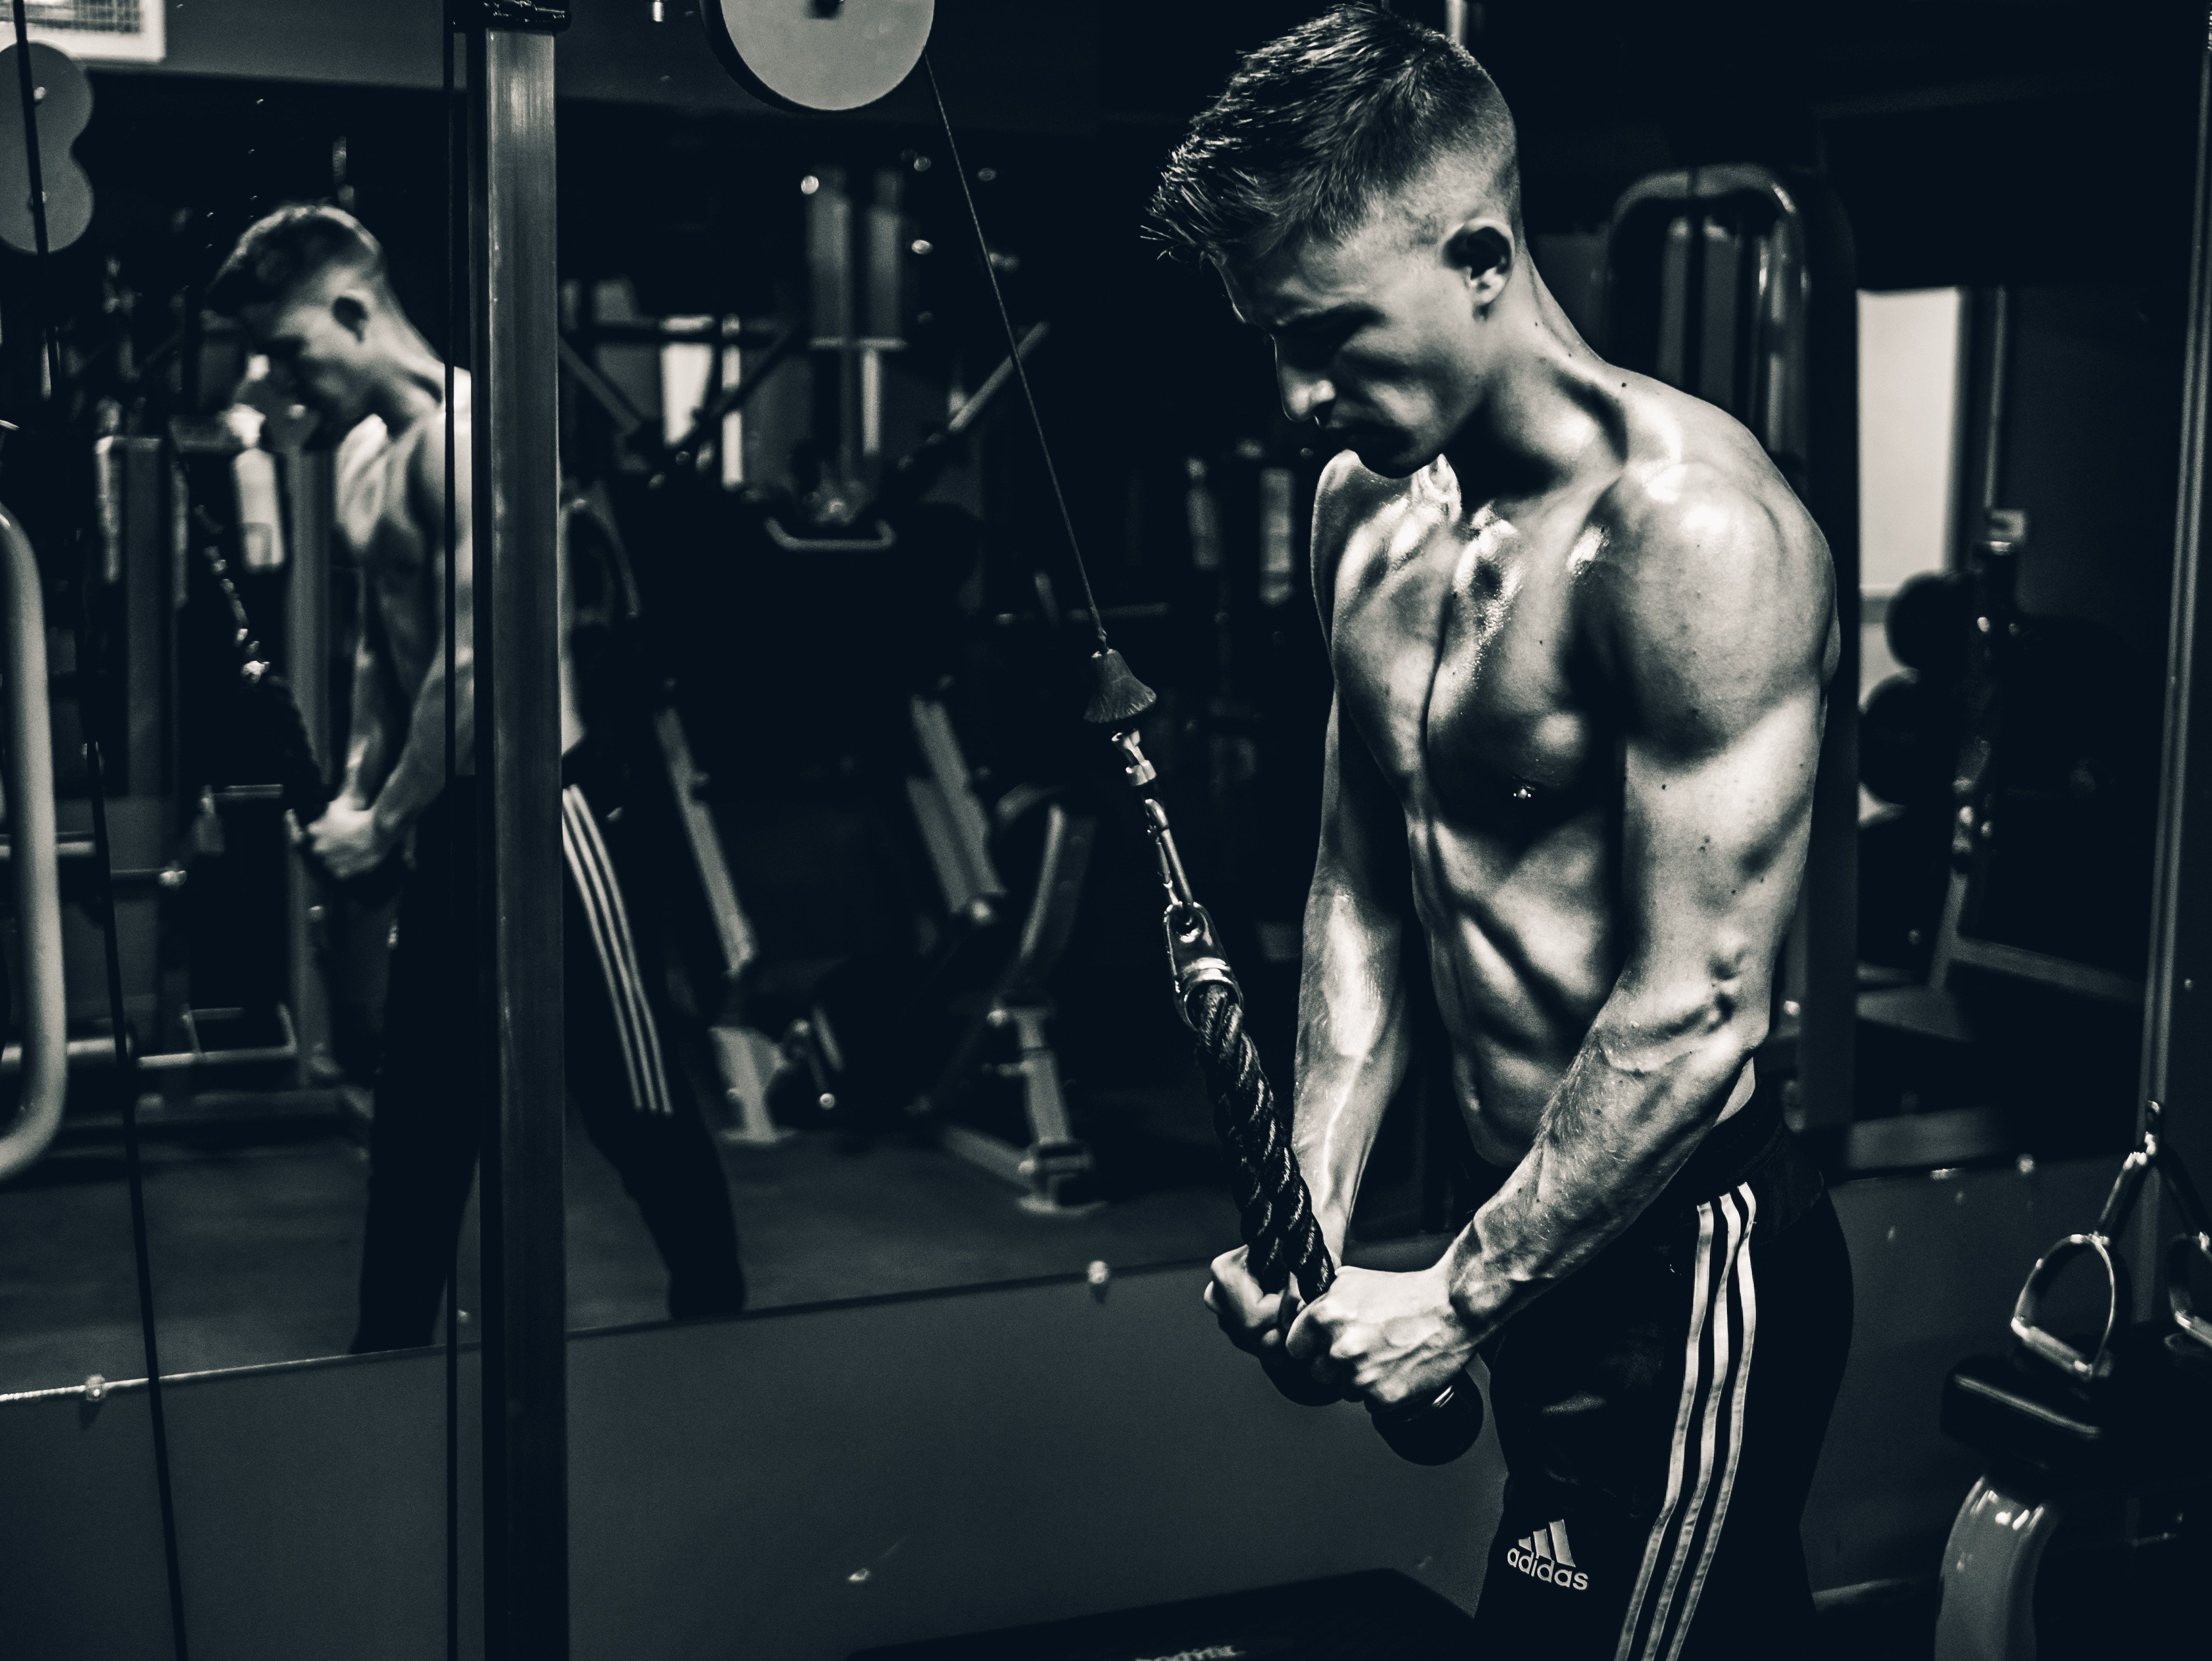 4592x3448 #workout, #strong, #Free image, #chest, #no shirt, # fitness, #reflection, #man, #gym, #time, #training, #black and white, #curl, #muscles, #never give up, #adidas, #mirror, #tricep, #dedication, #exercise. Mocah HD Wallpaper